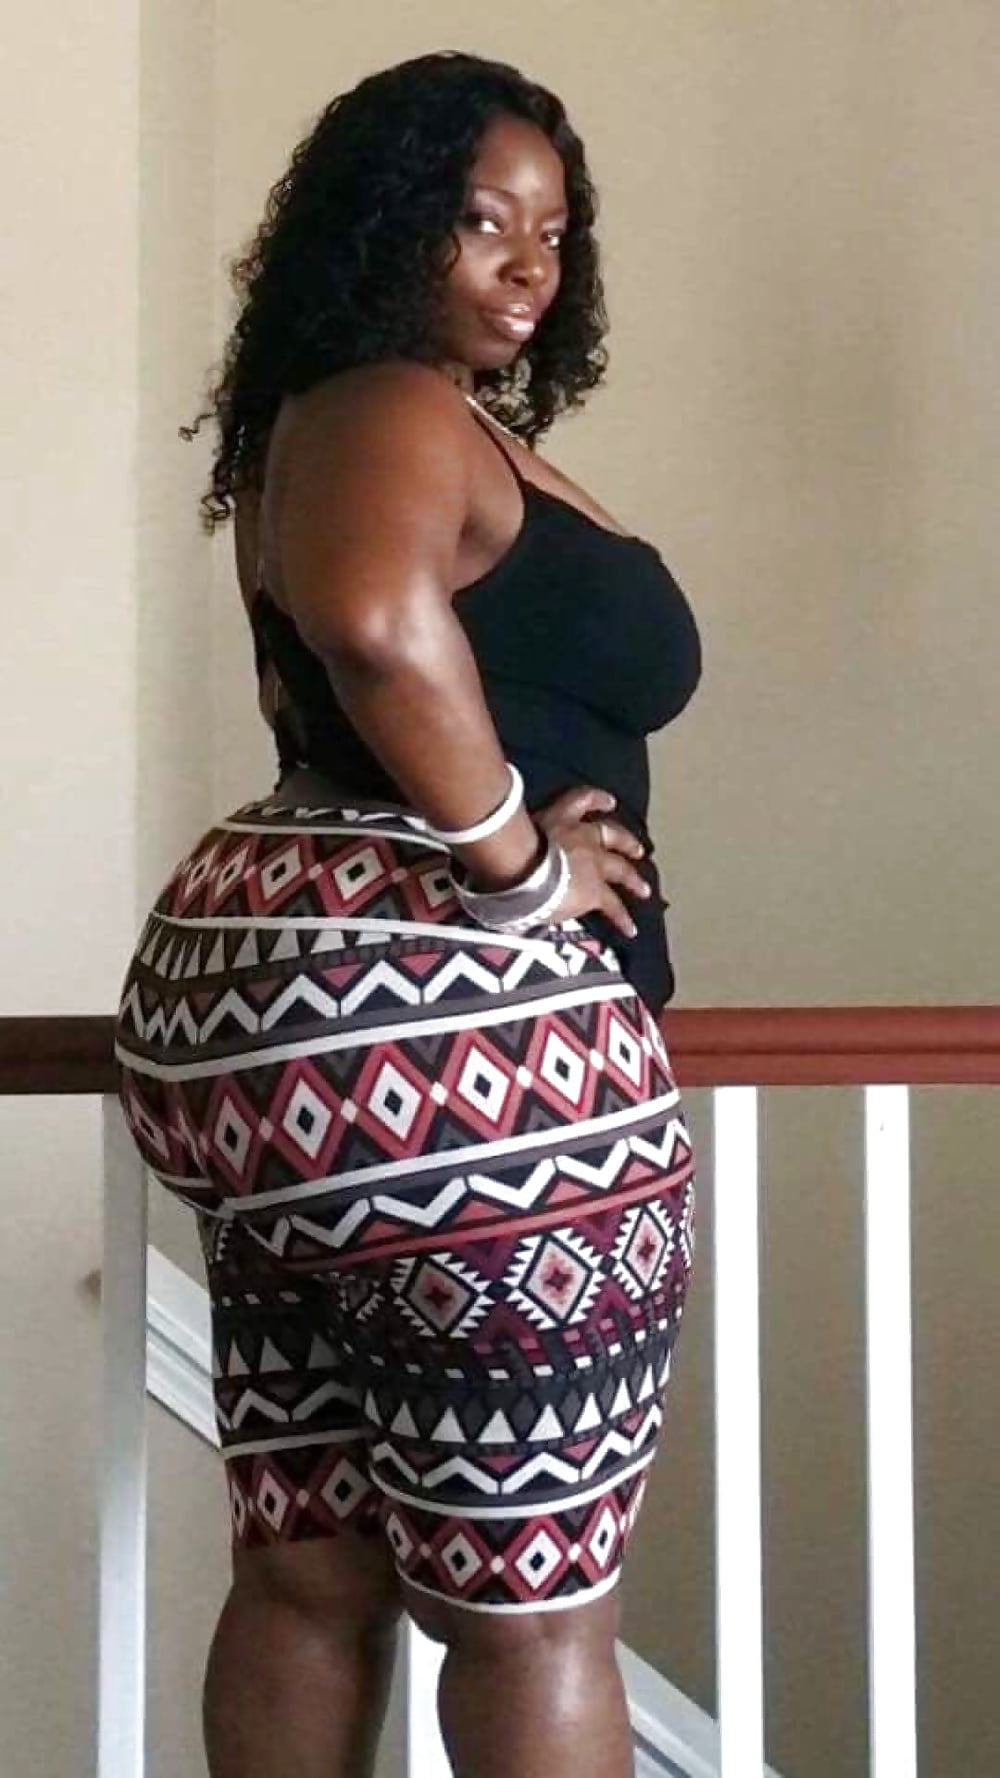 Fat black woman pictures ♥ How African women fall in love - Steemit.